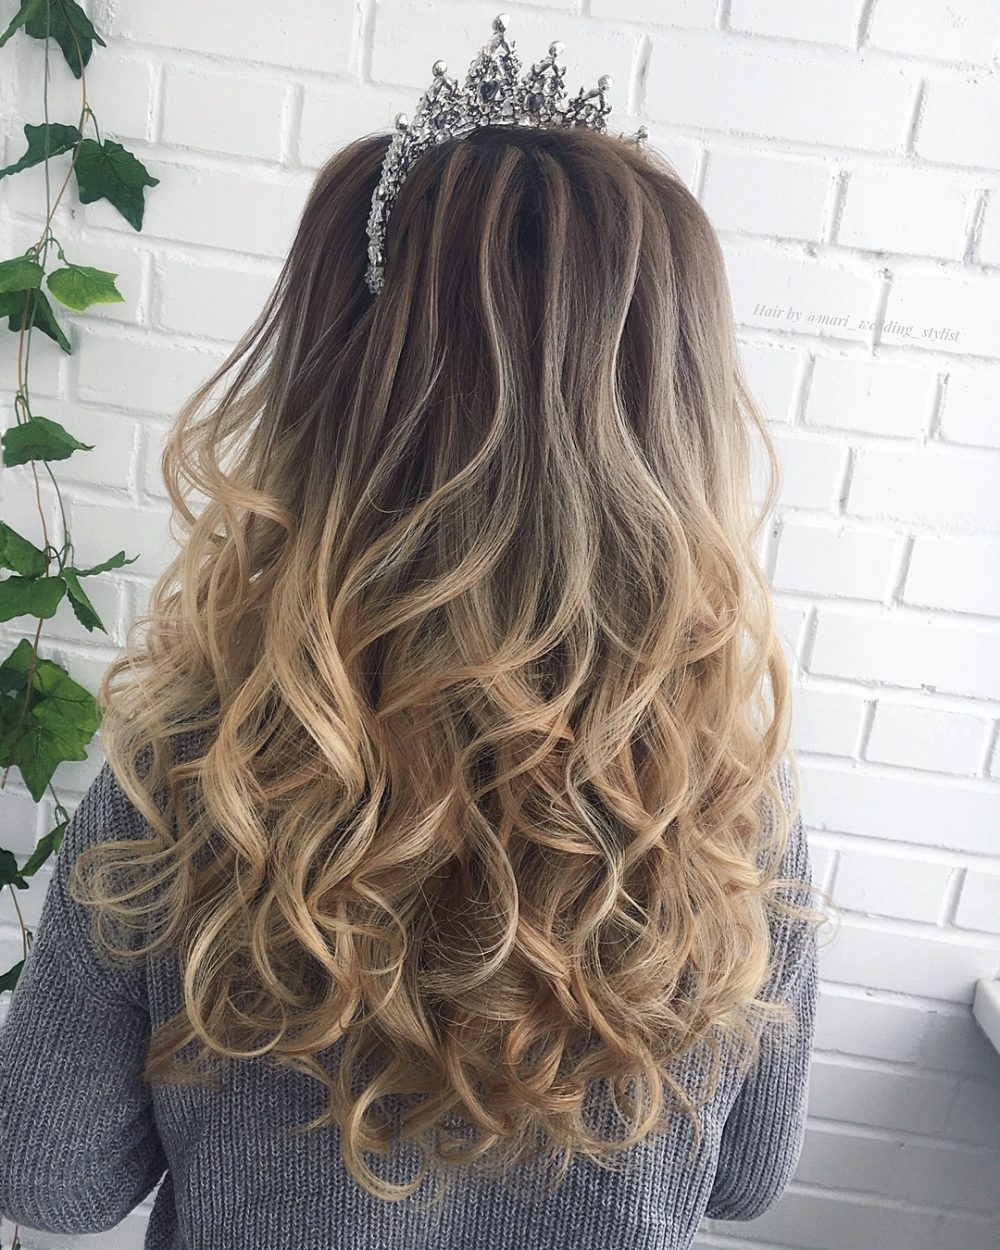 22 Perfectly Gorgeous Down Hairstyles For Prom with Hair Styles For All Hair Down